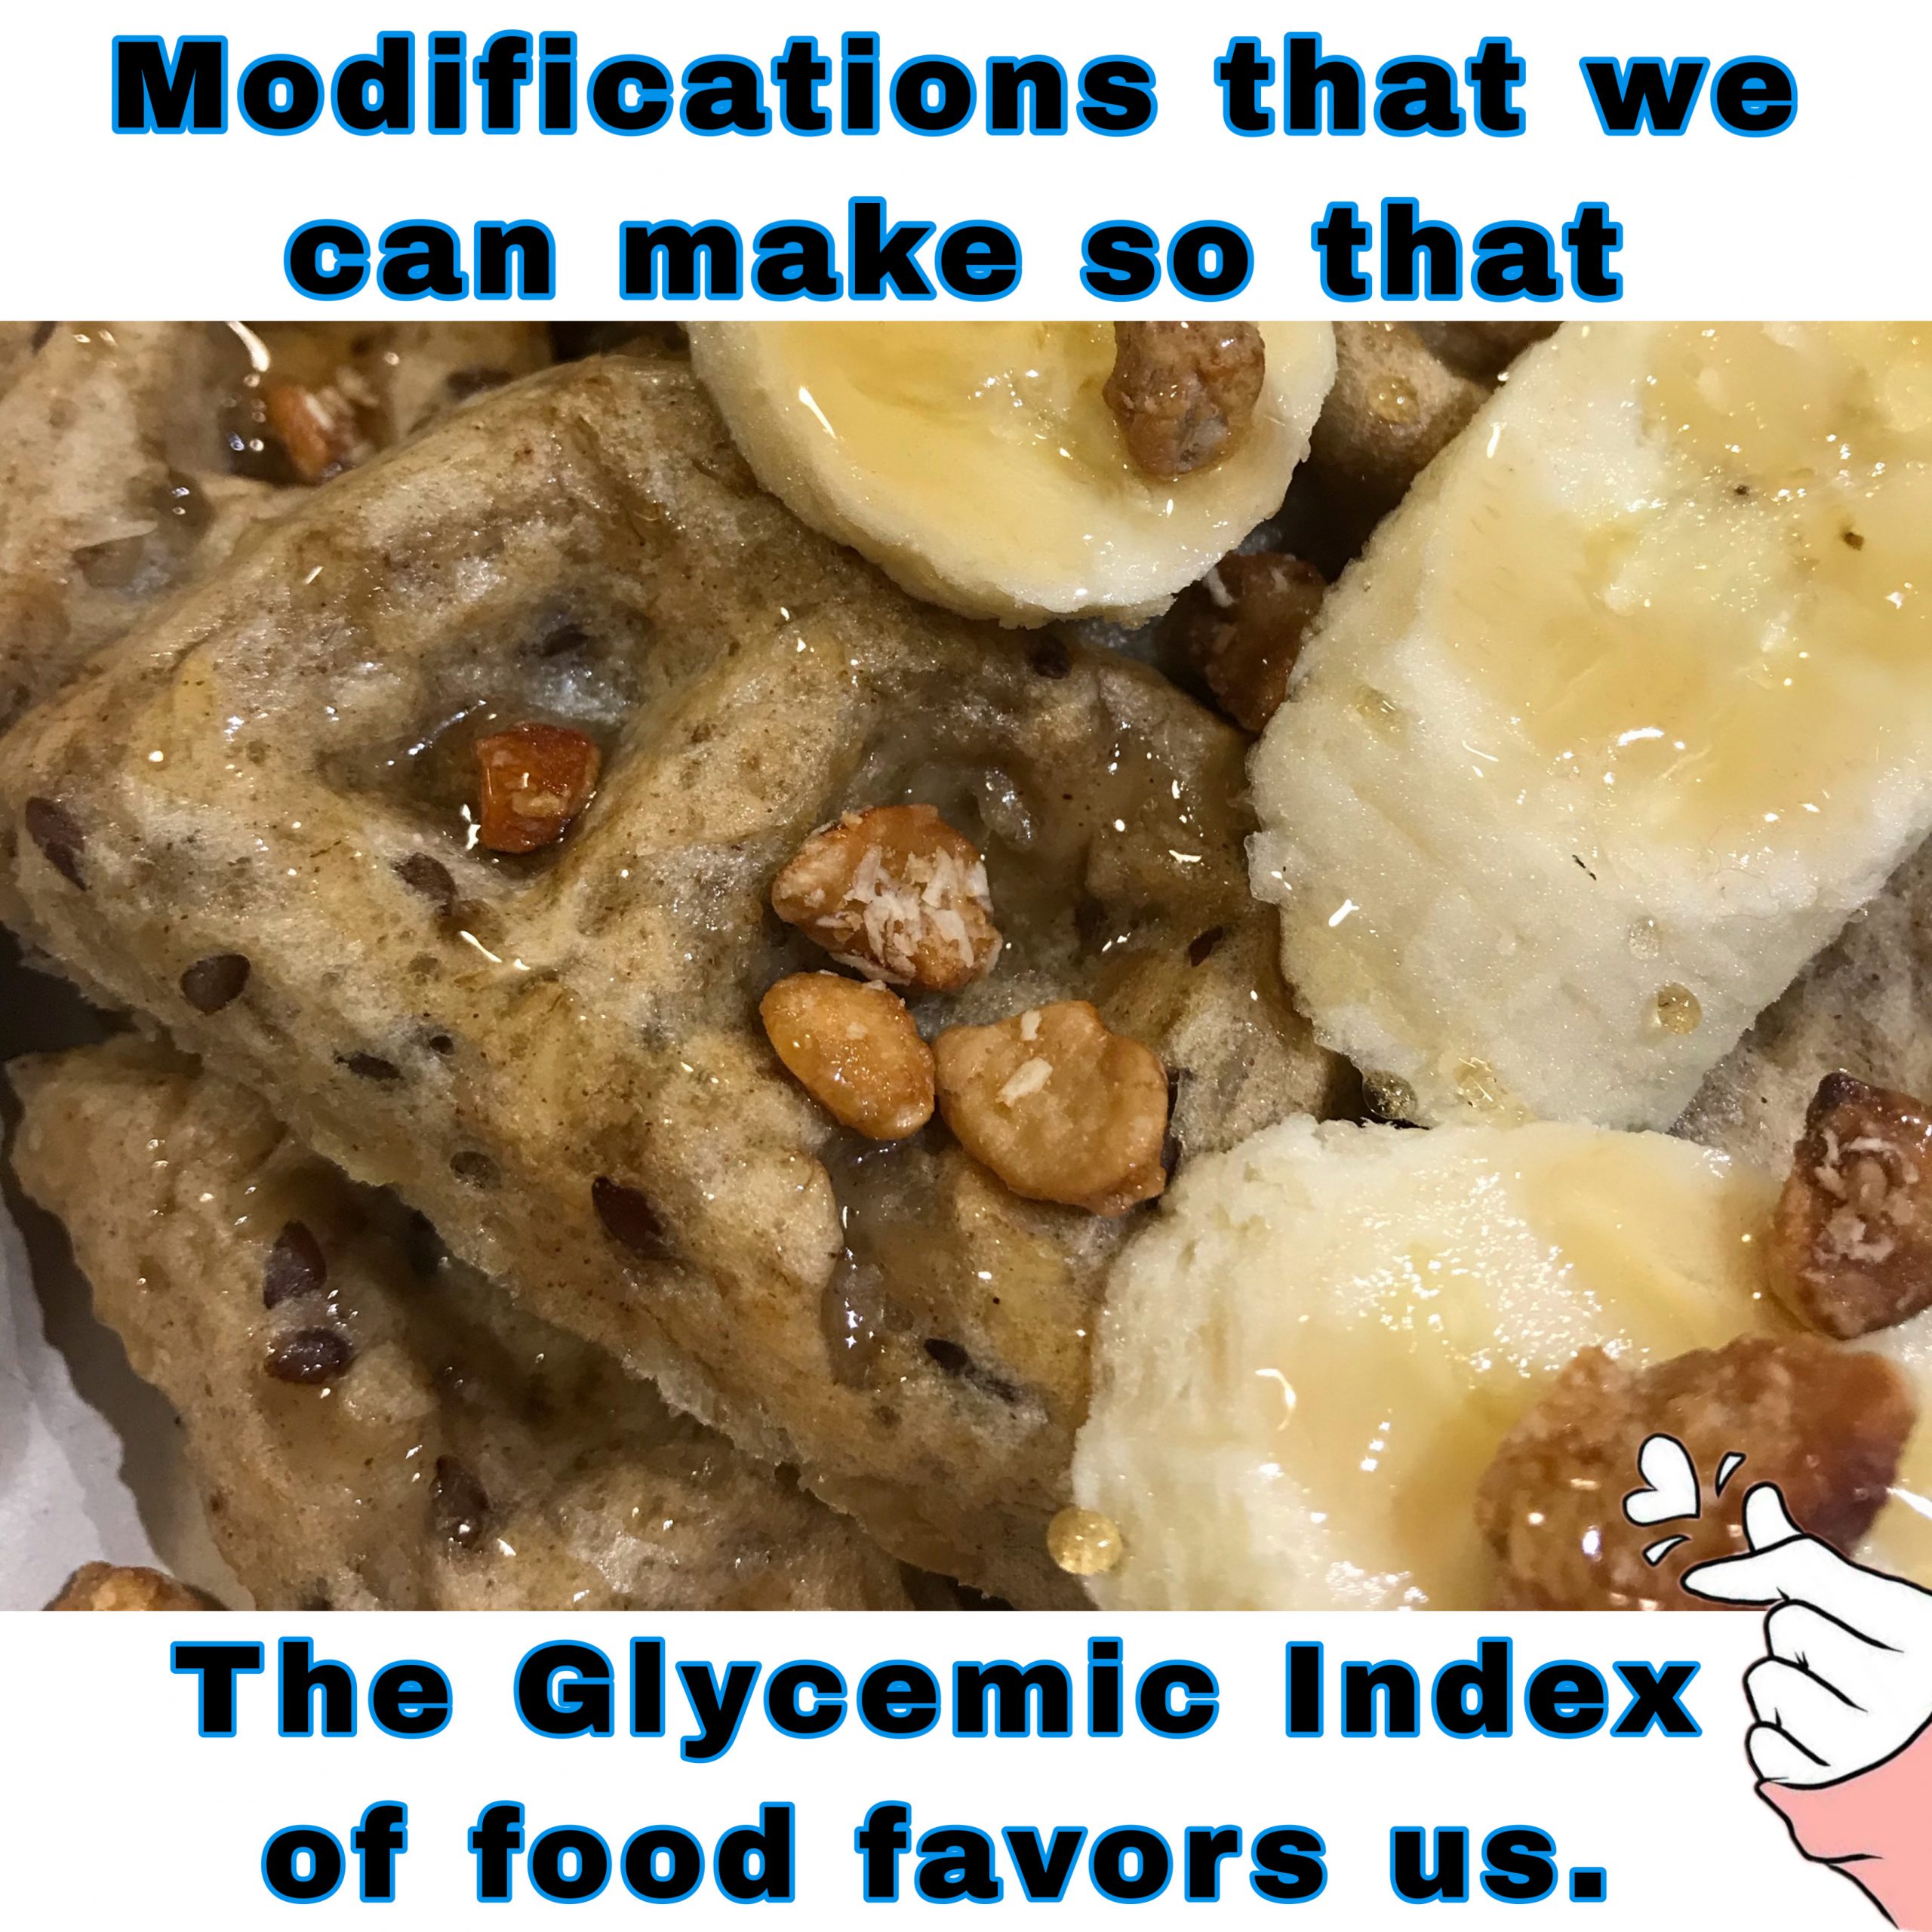 modifications that we can make so that the glycemic index of food favors us